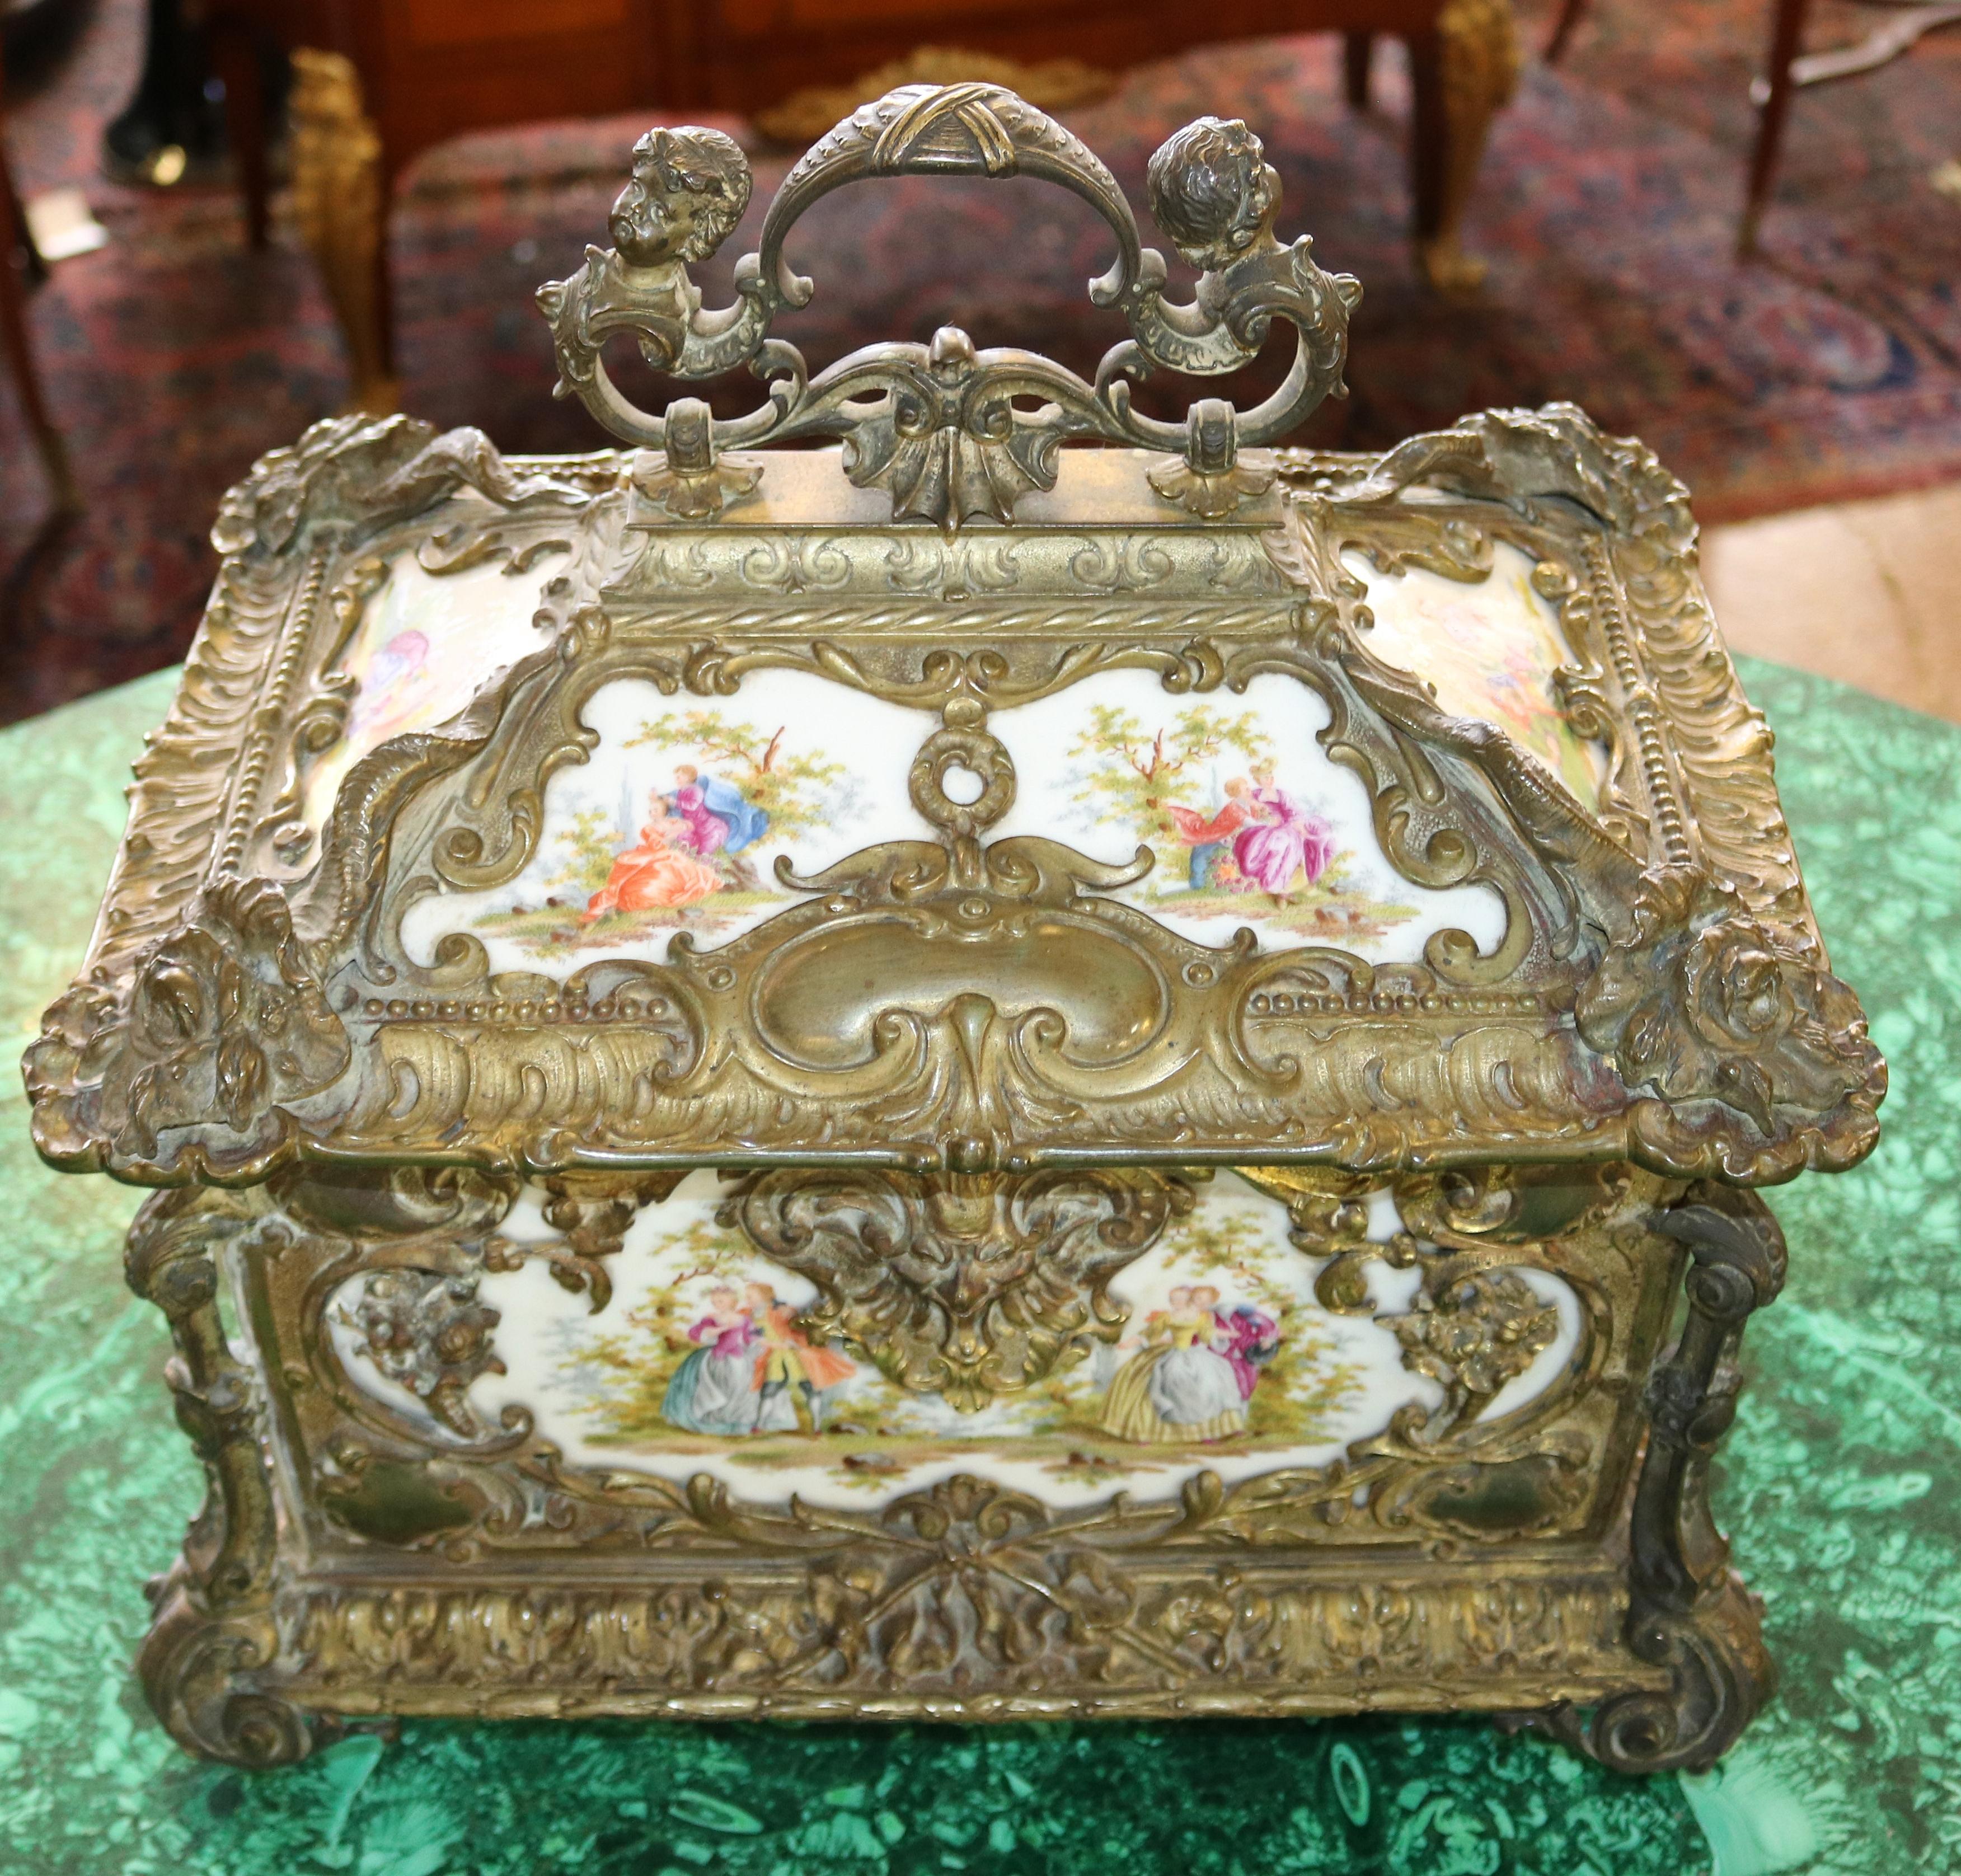 Outstanding Large 19th Century Bronze & Porcelain Jewelry Casket Box For Sale 2